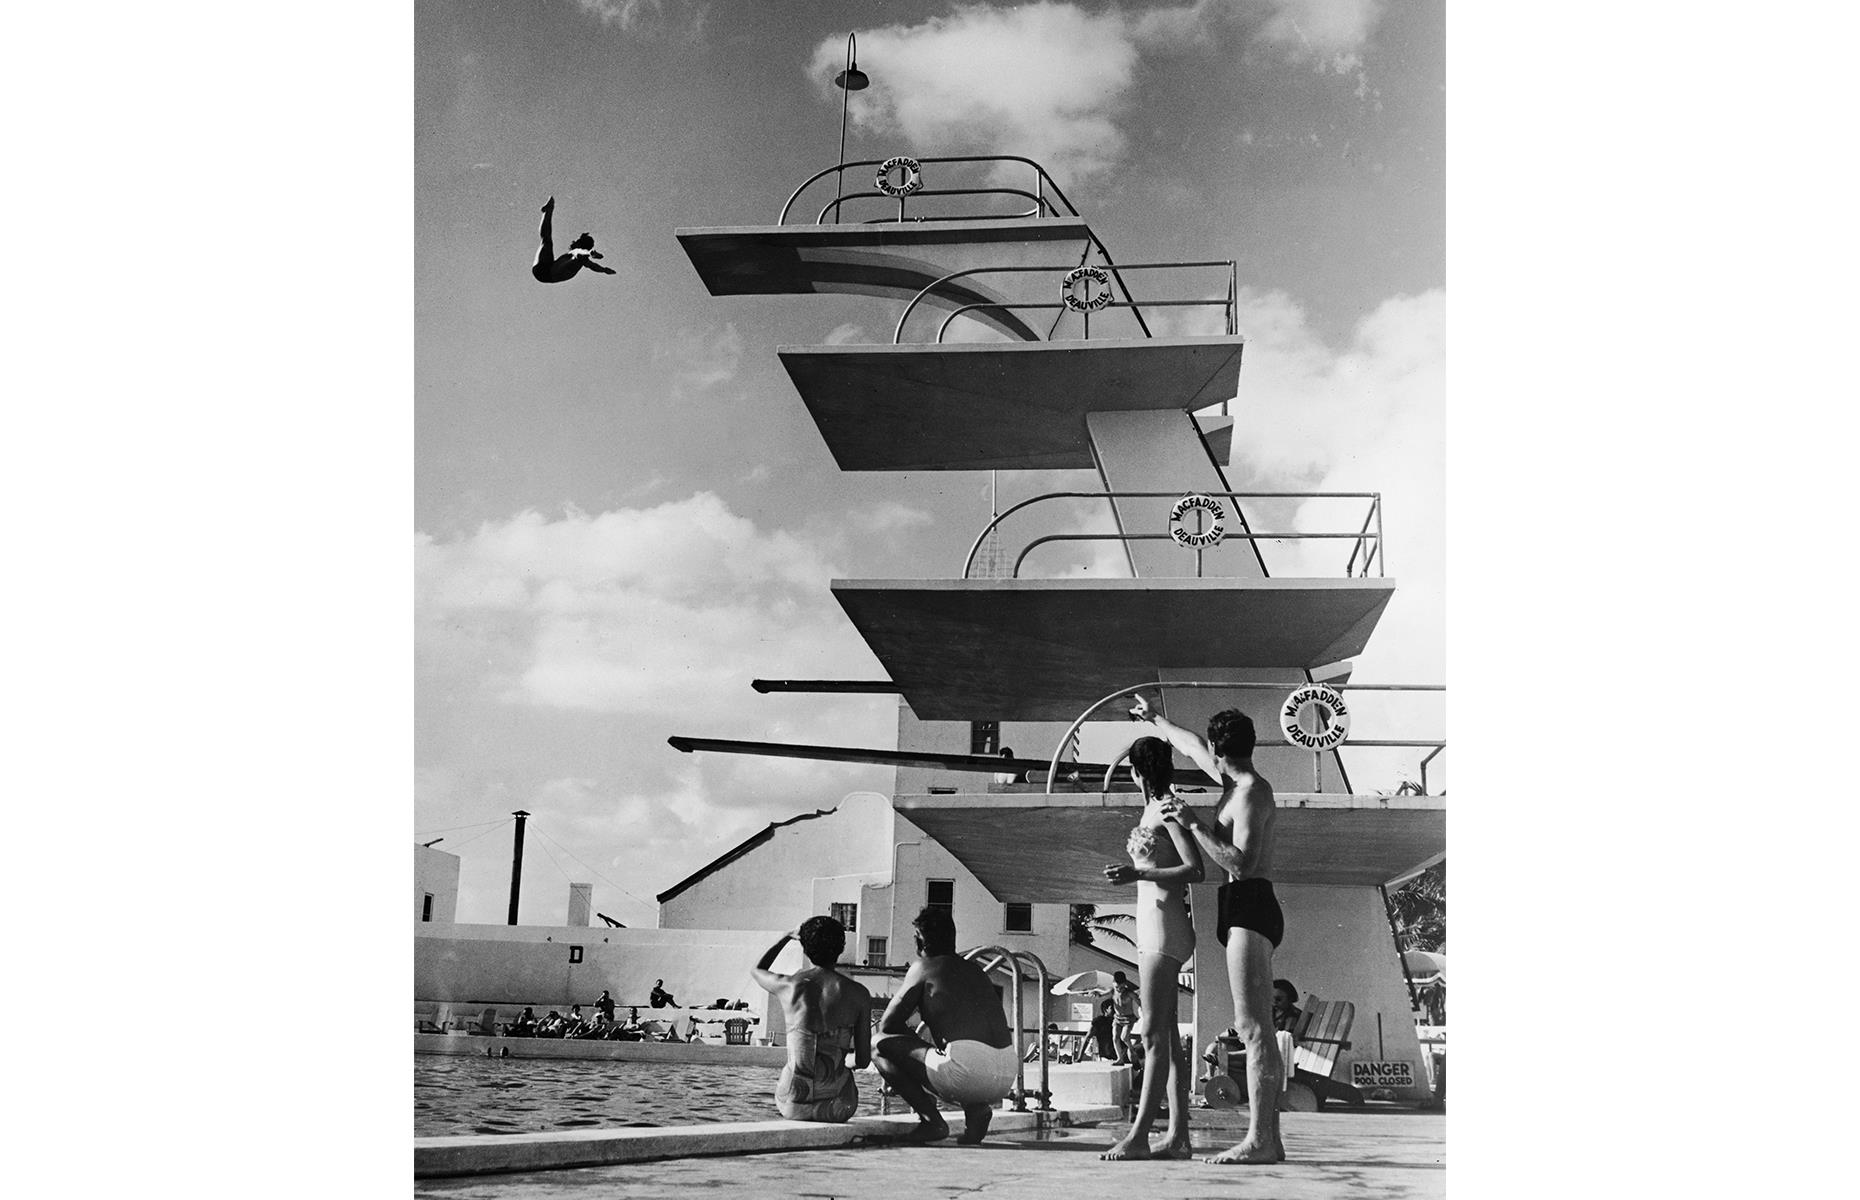 In fact, the 1950s and 1960s are often tipped as Miami Beach's golden era for tourism. Hotels, resorts and other attractions continued to shoot up and celebs, couples and families alike continued to spend their vacation time here. This 1950s photo is taken at Miami Beach's Deauville Beach Resort (then the MacFadden-Deauville Hotel) and sees vacationers gaze up in awe as a man jumps off the highest diving platform.